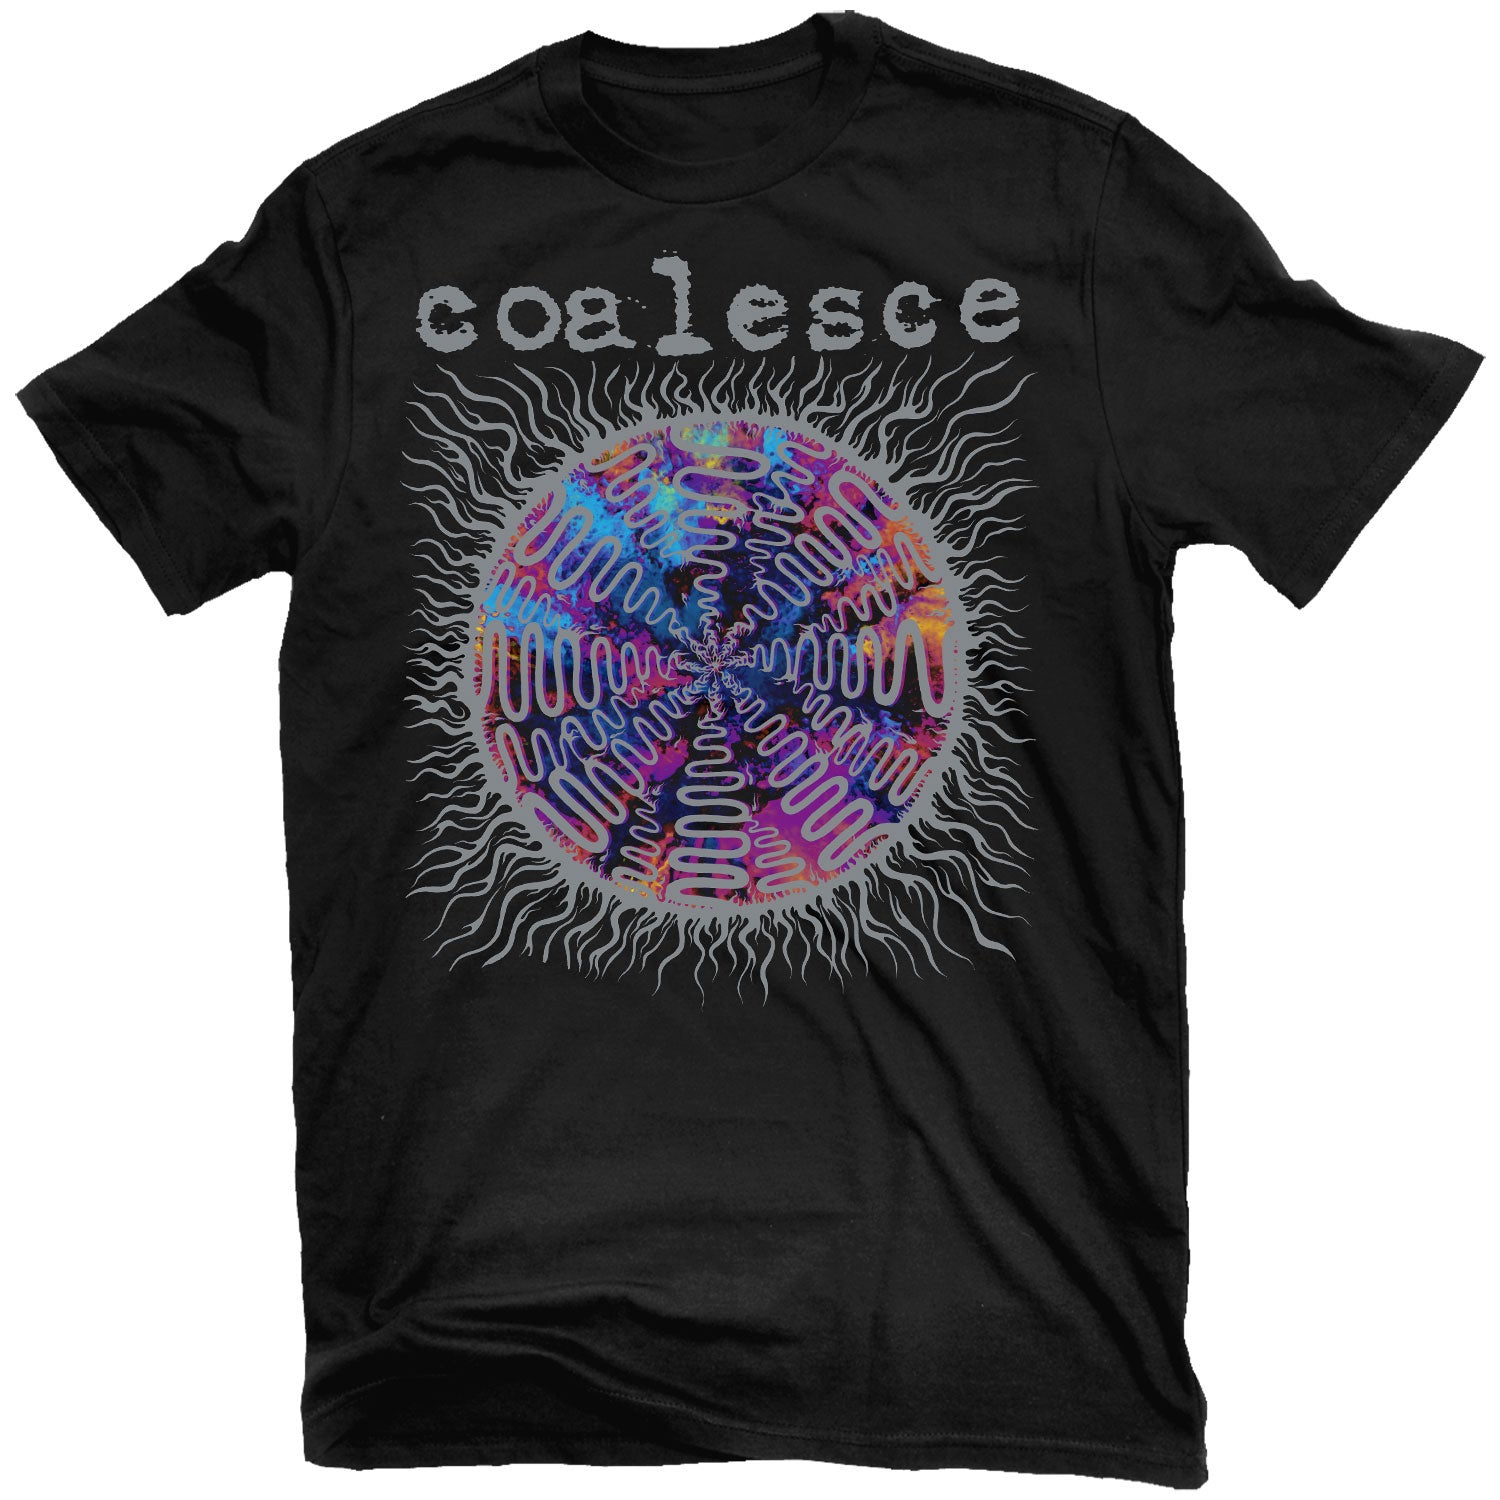 Coalesce "There Is Nothing New Under The Sun" T-Shirt